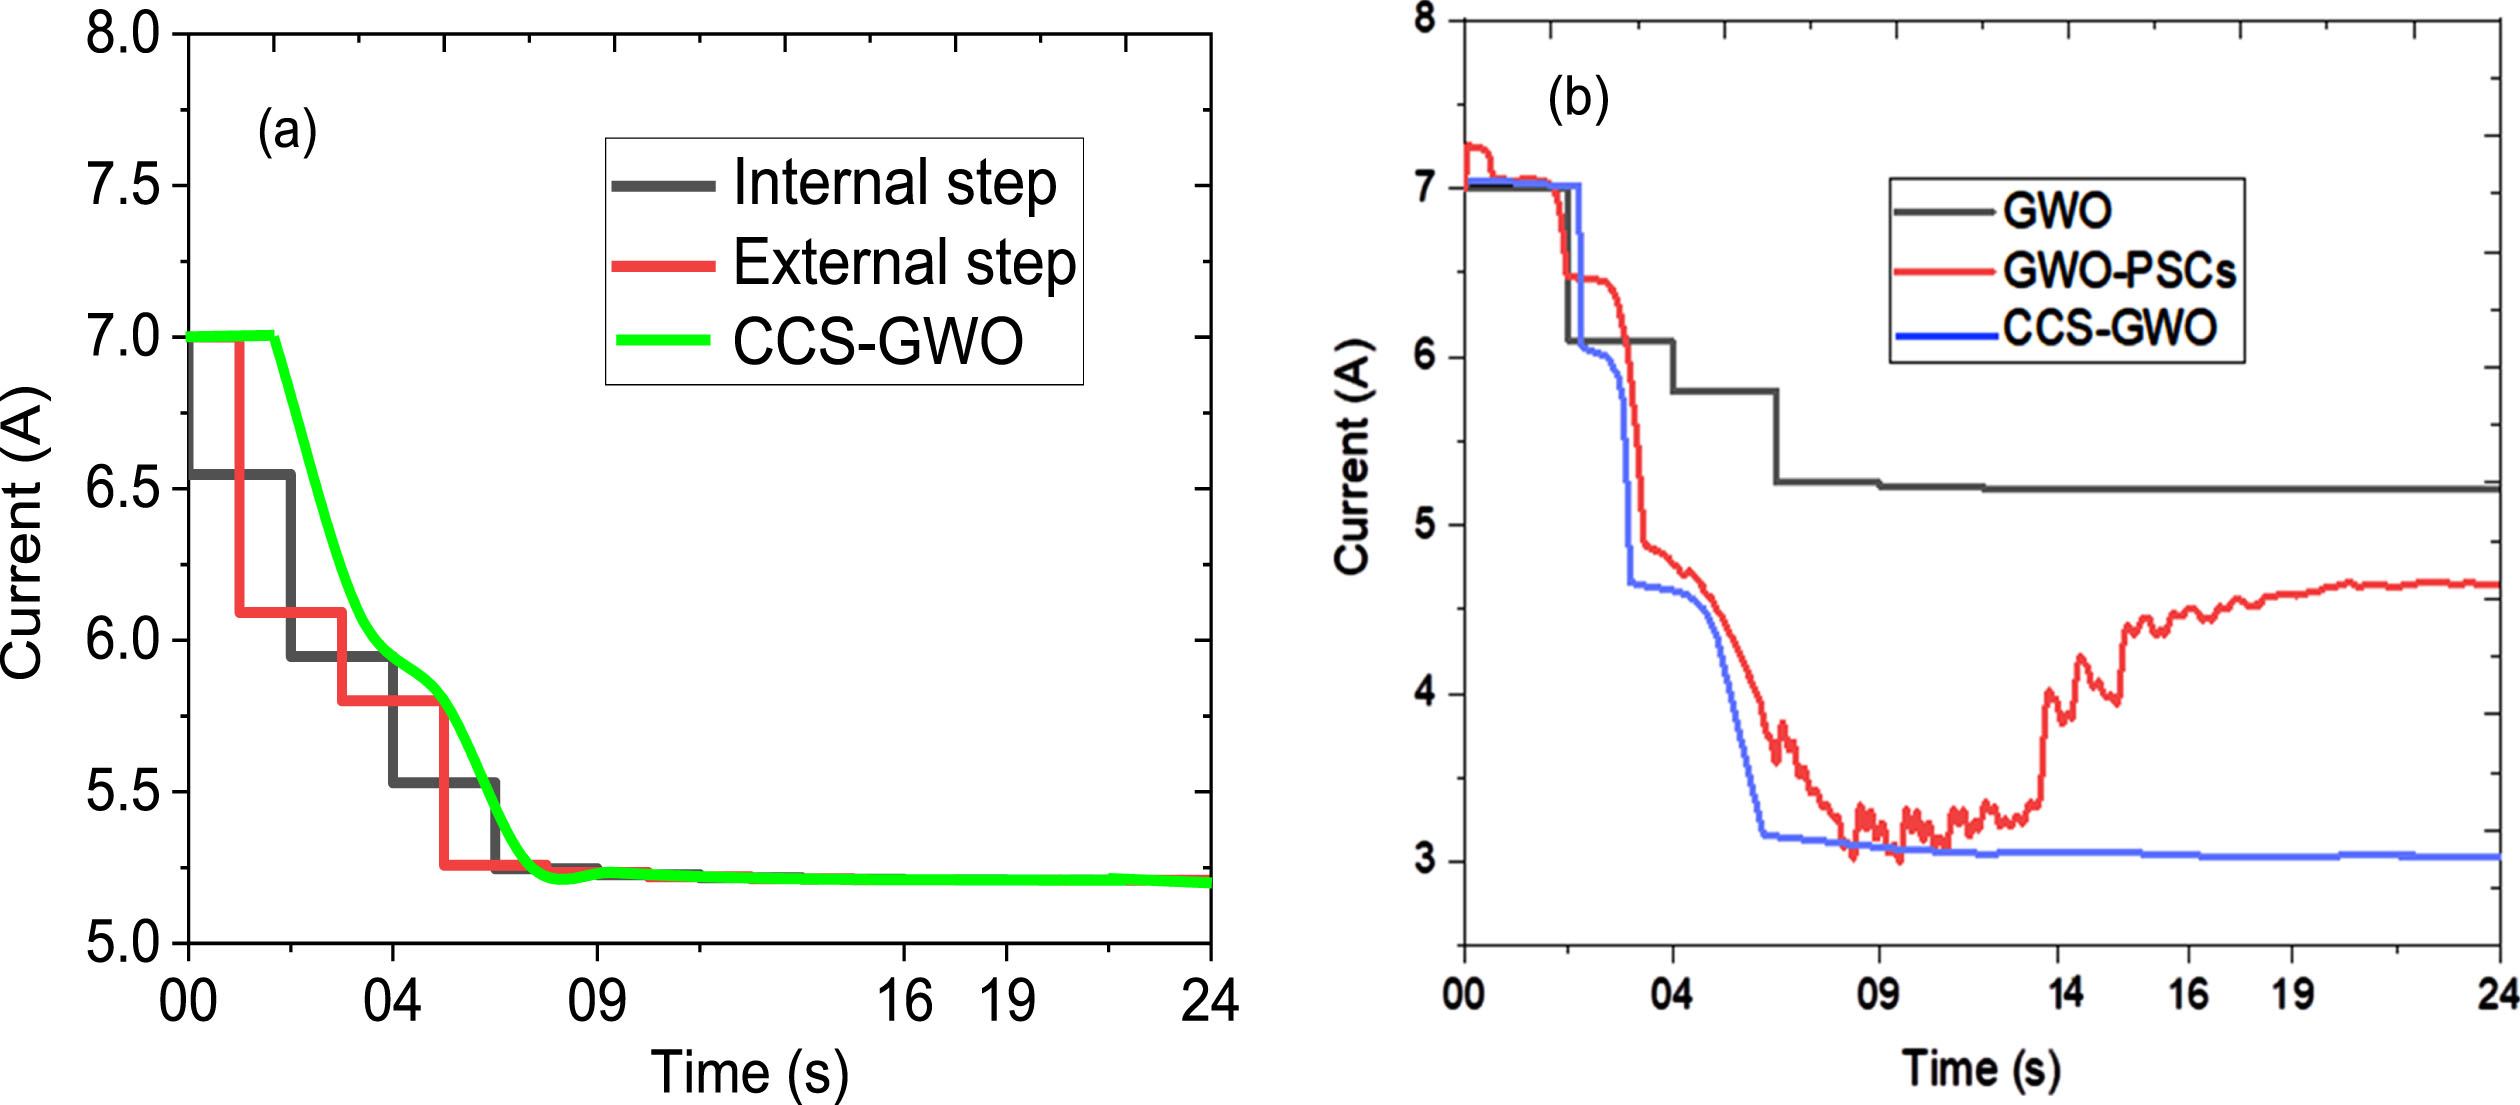 The CCS-GWO and internal, external step curves (a) at STC and the CCS-GWO, GWO and GWO-PSCs curves (b) under partial shading conditions.